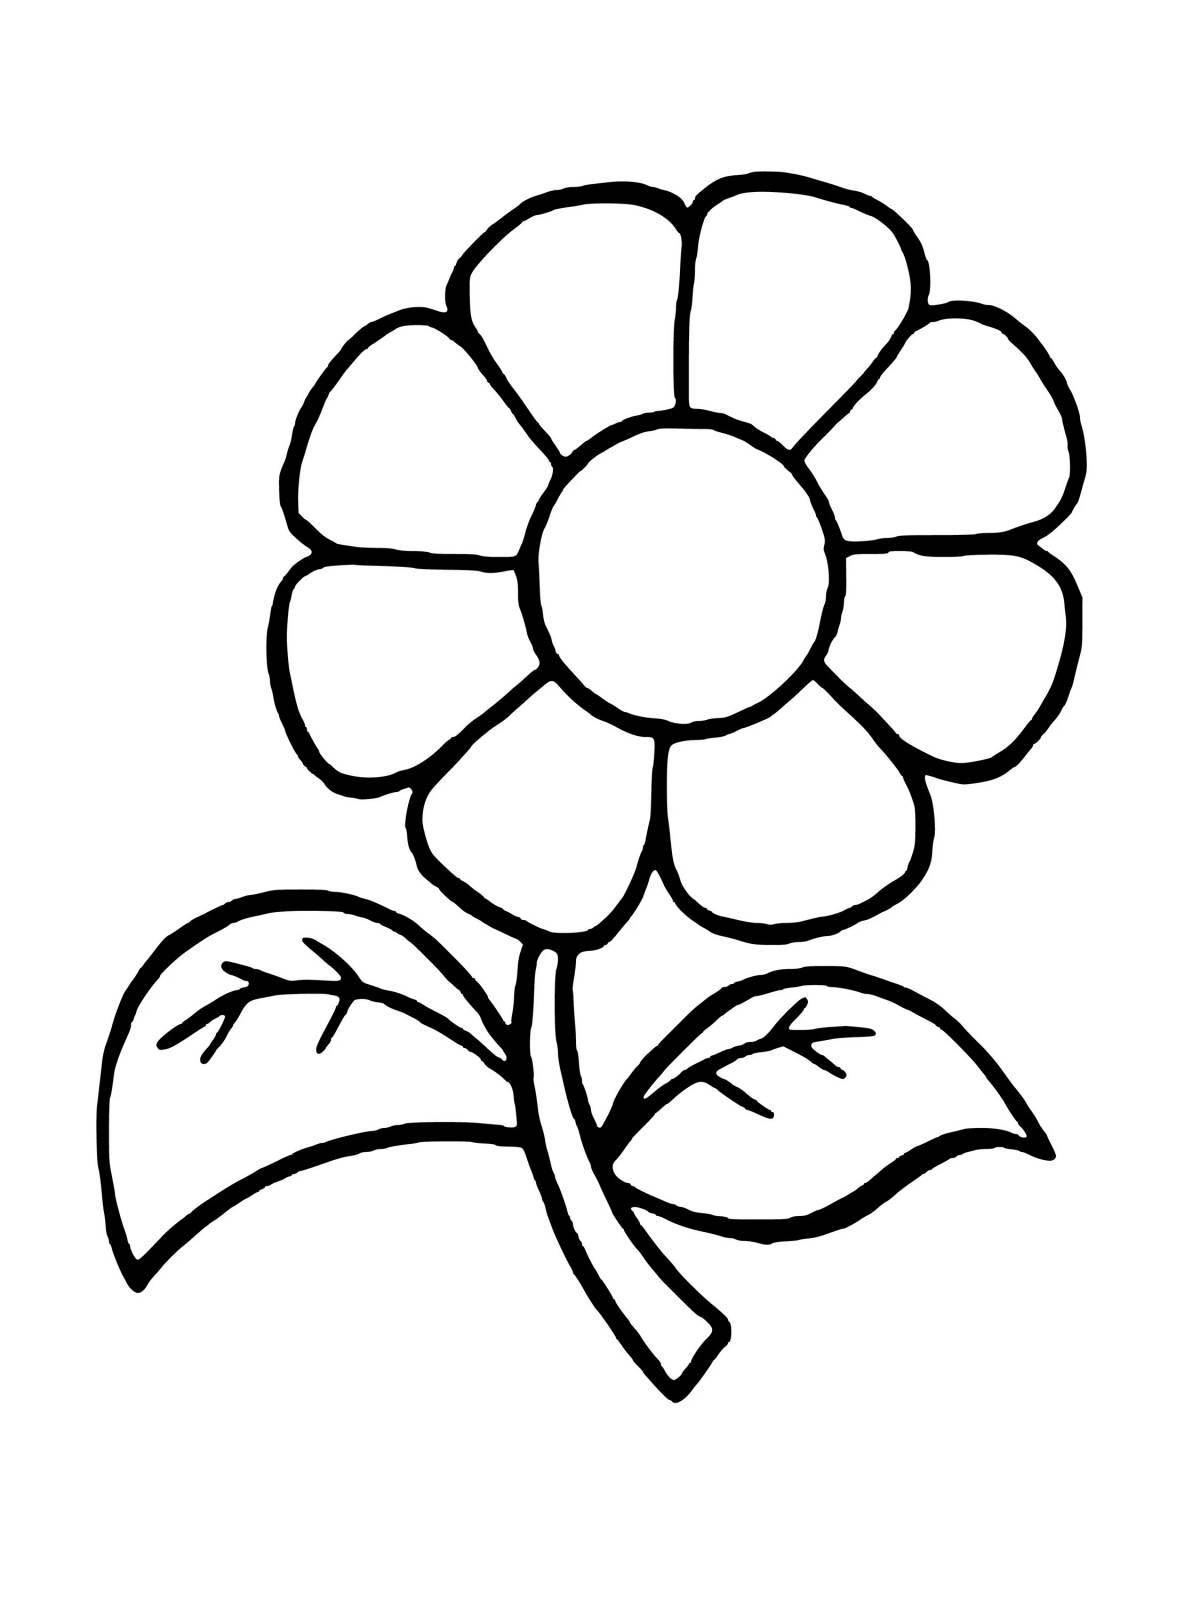 Awesome seven-flower coloring book